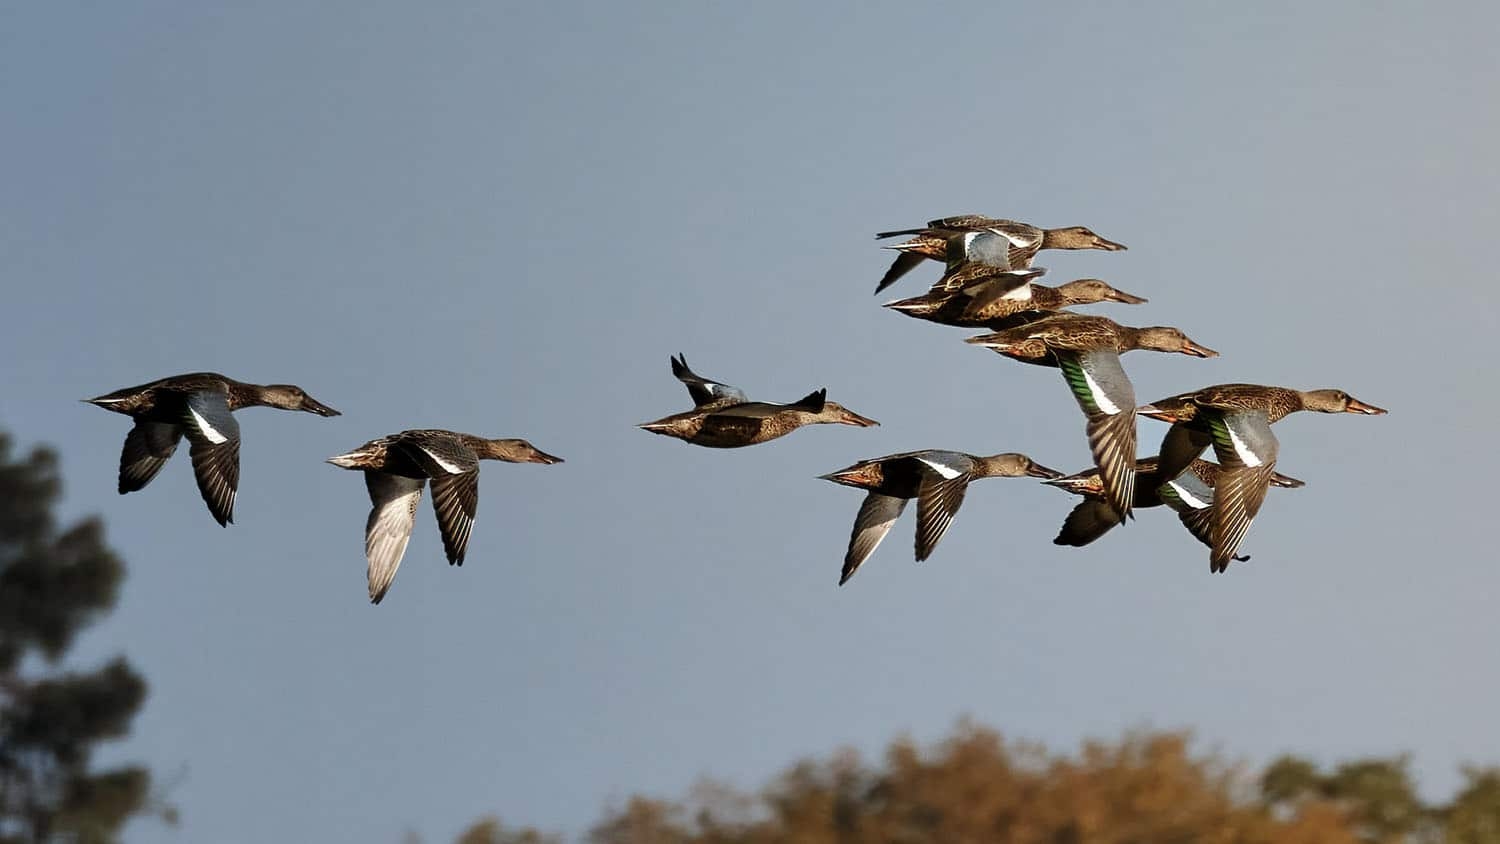 a flock of northern shoveler ducks flies from left to right